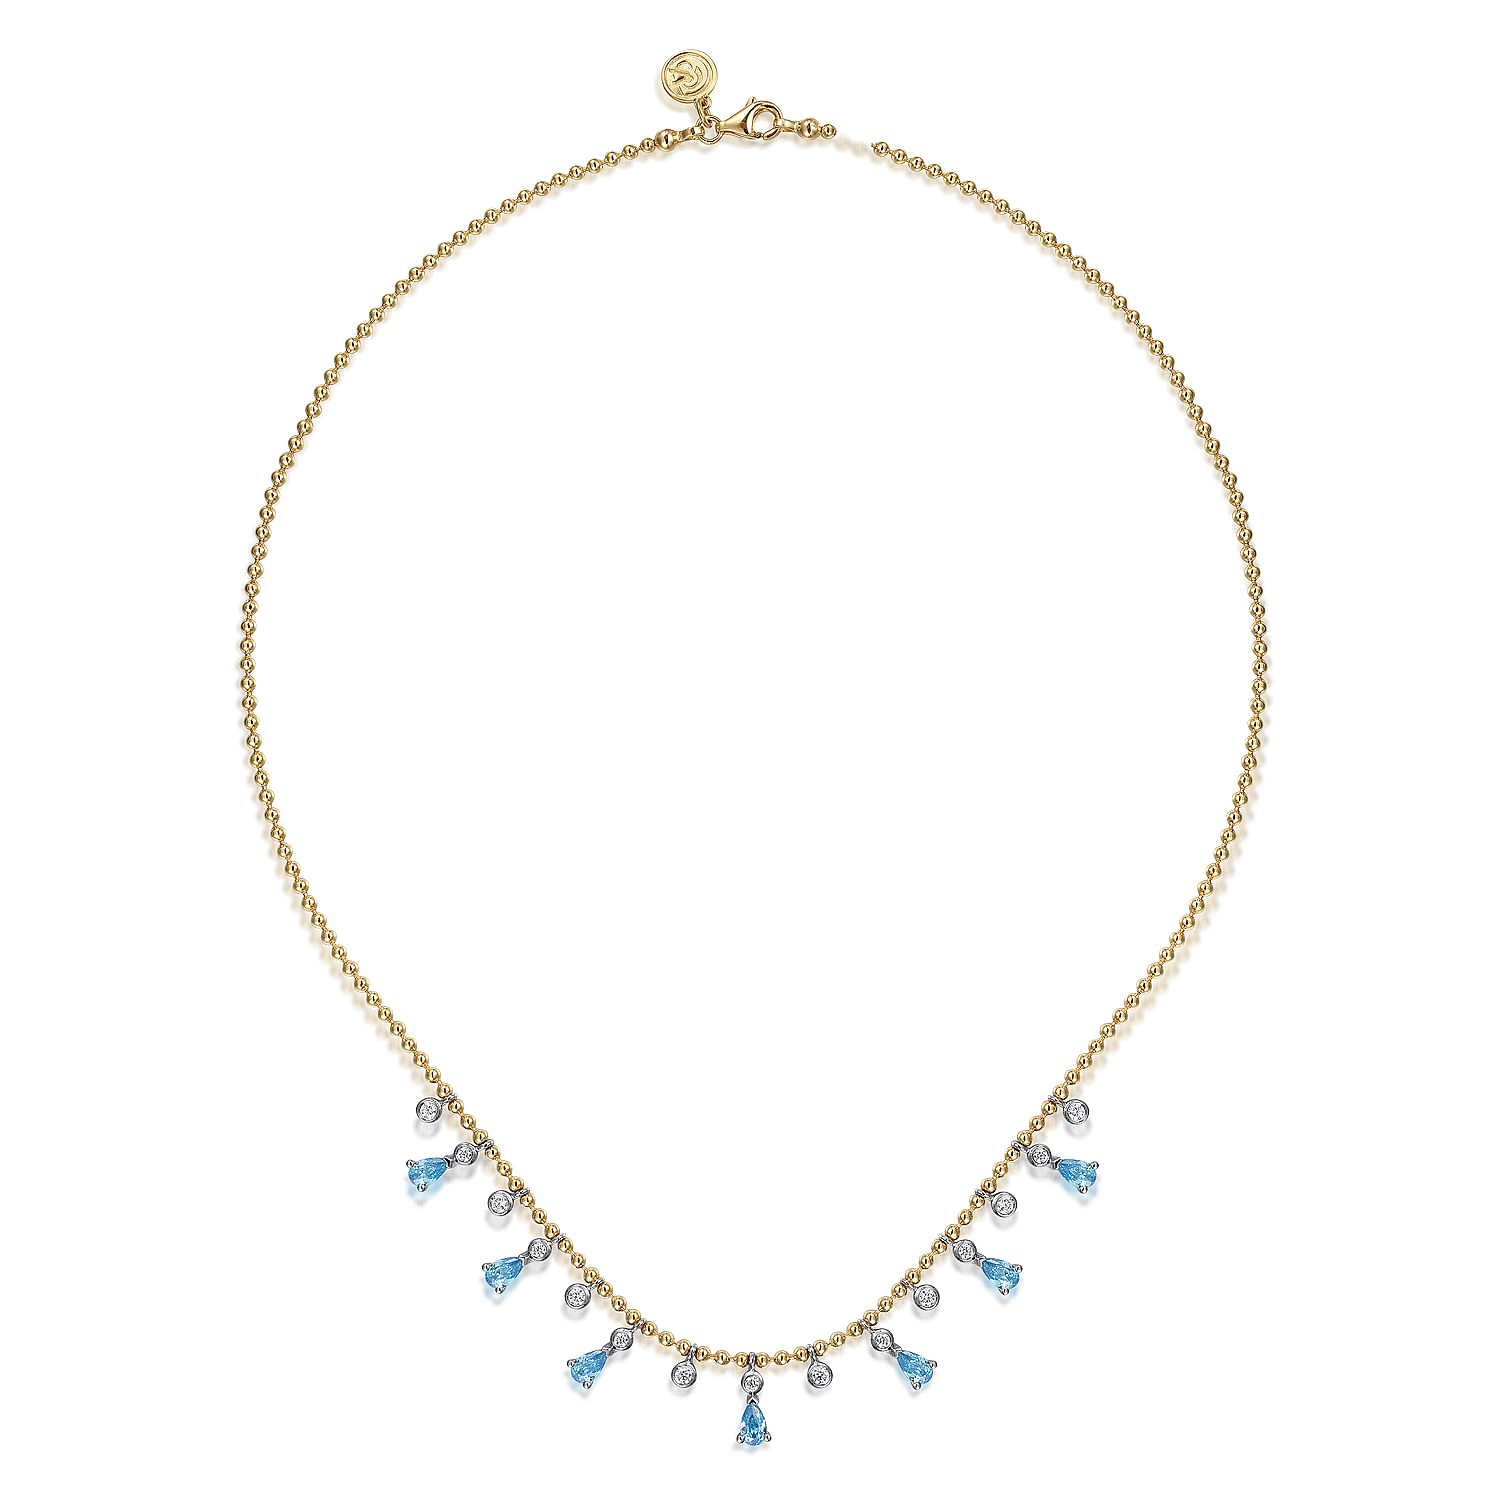 14K White and Yellow Gold Bead Chain Diamond and Blue Topaz Droplet Necklace